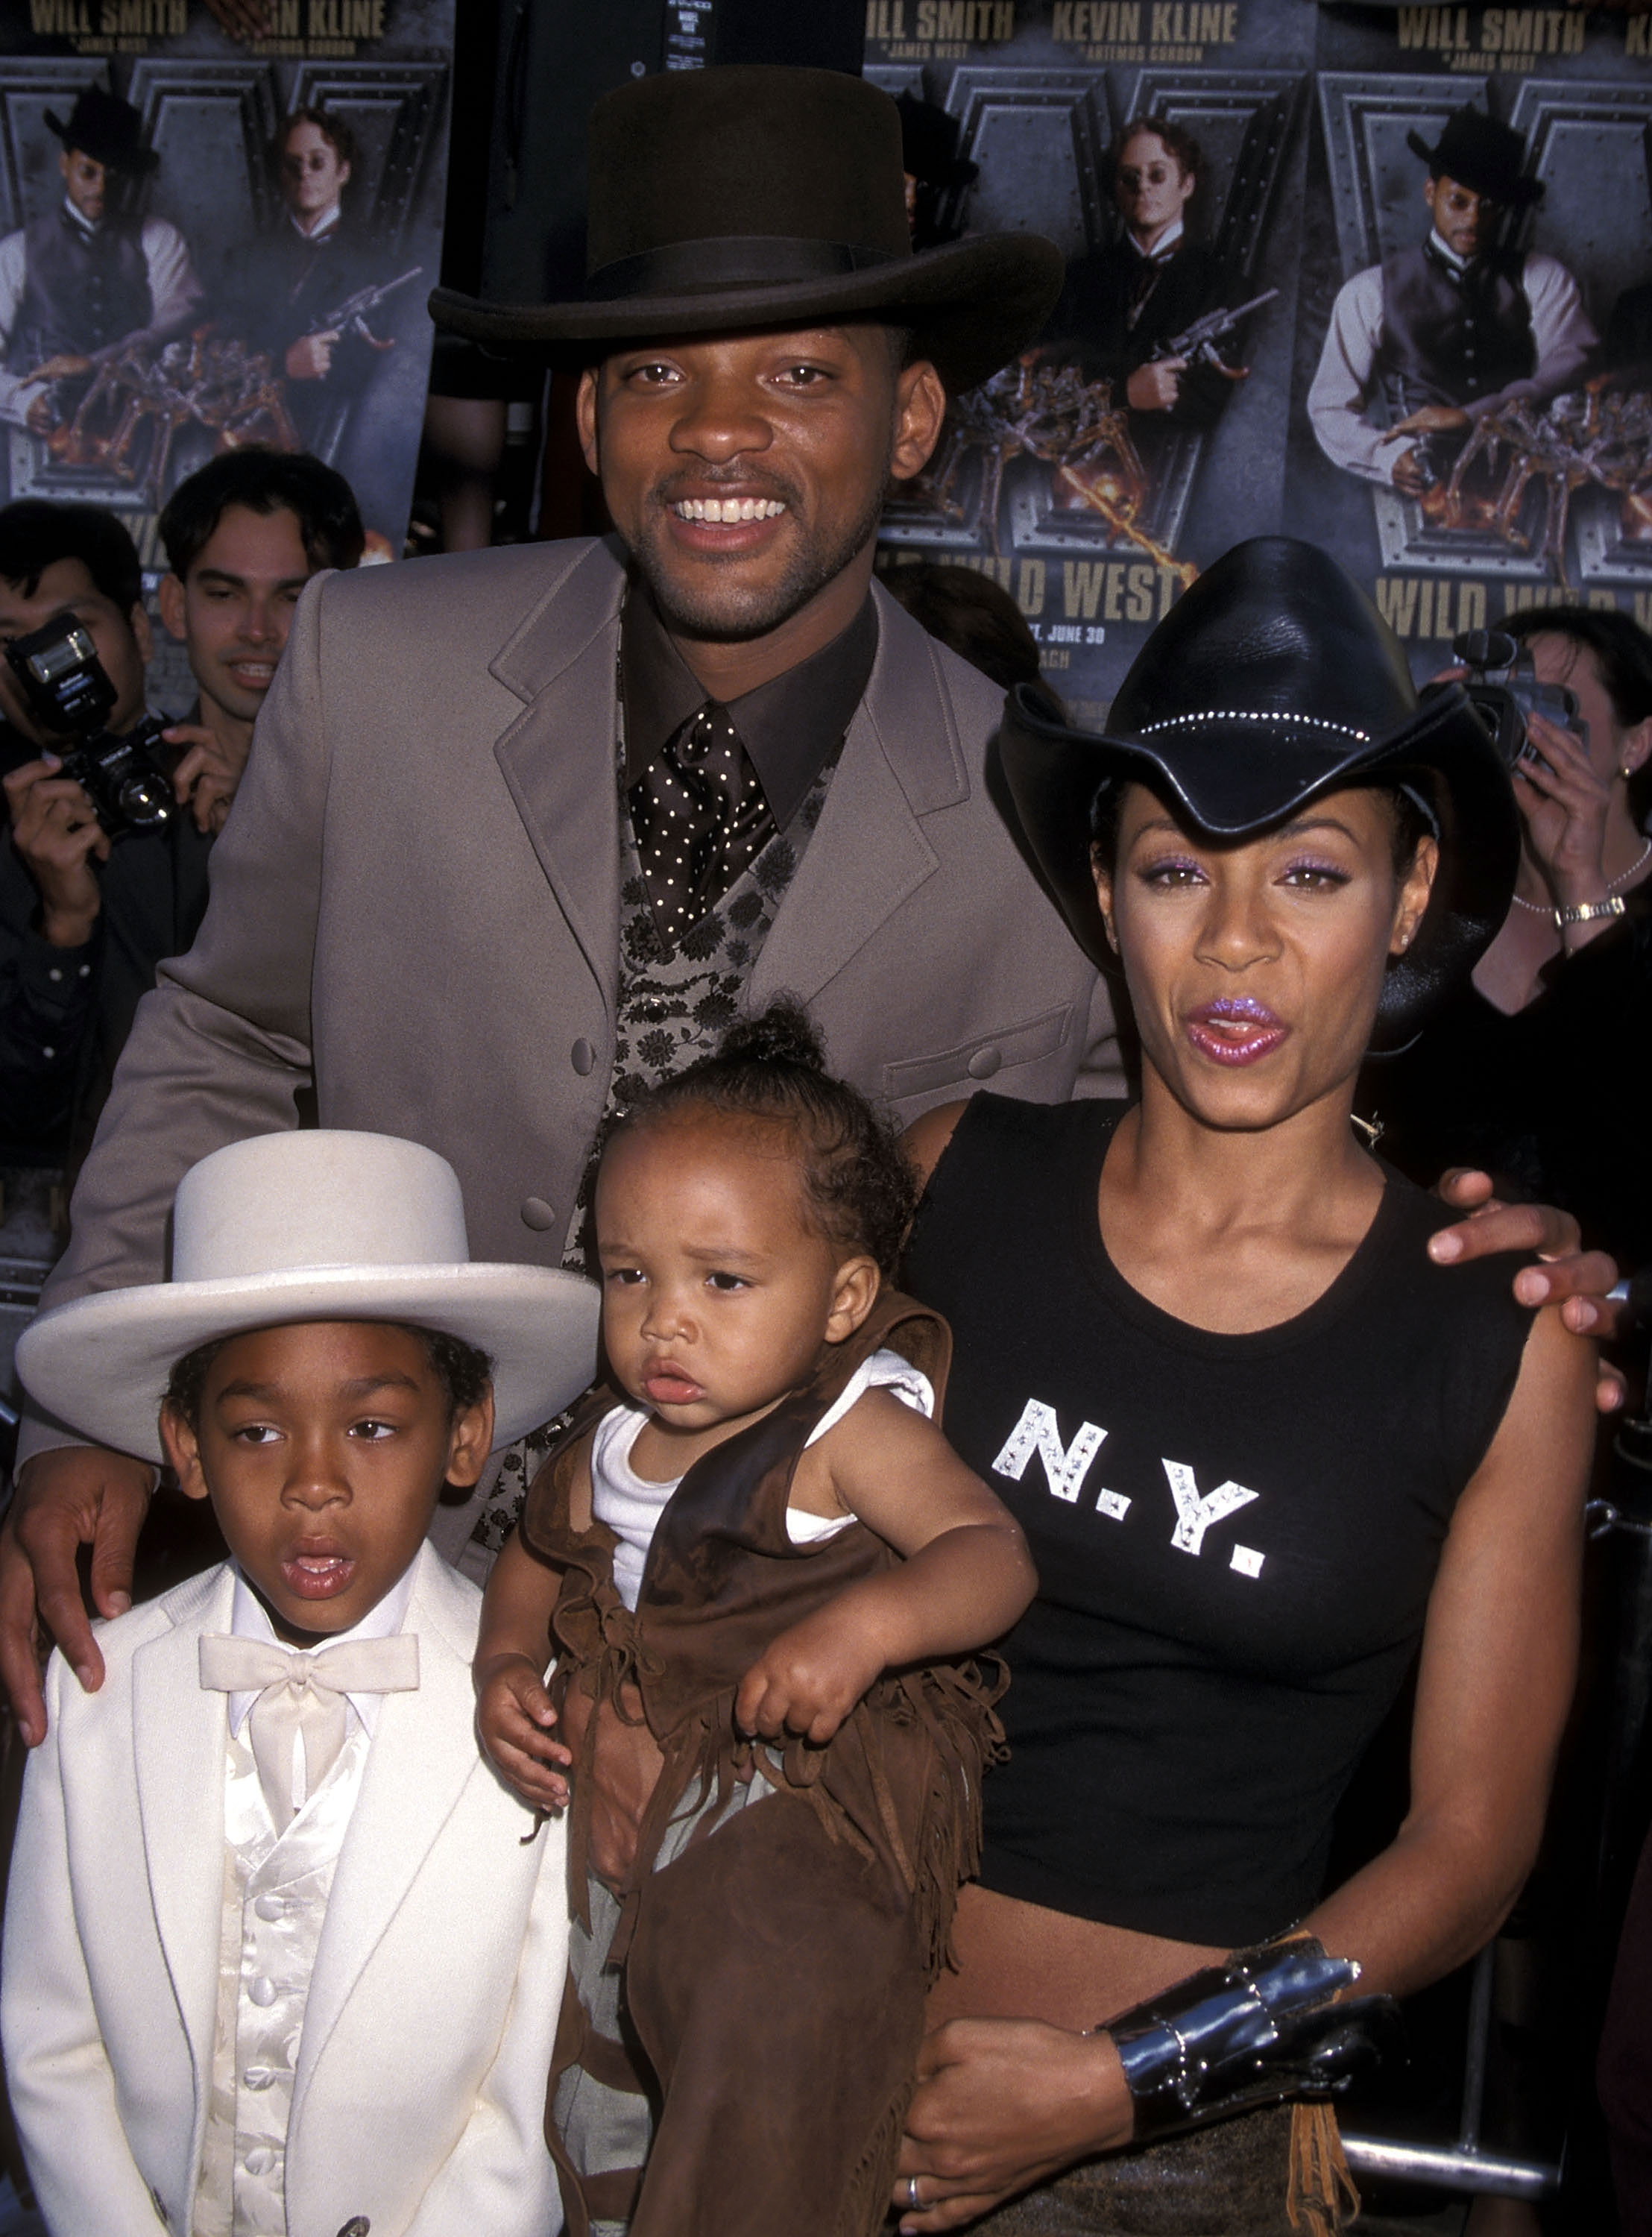 Will Smith, Jada Pinkett Smith, their son Jaden Smith and Will's son Trey Smith at the "Wild Wild West" premiere on June 28, 1999 in Westwood, California | Source: Getty Images